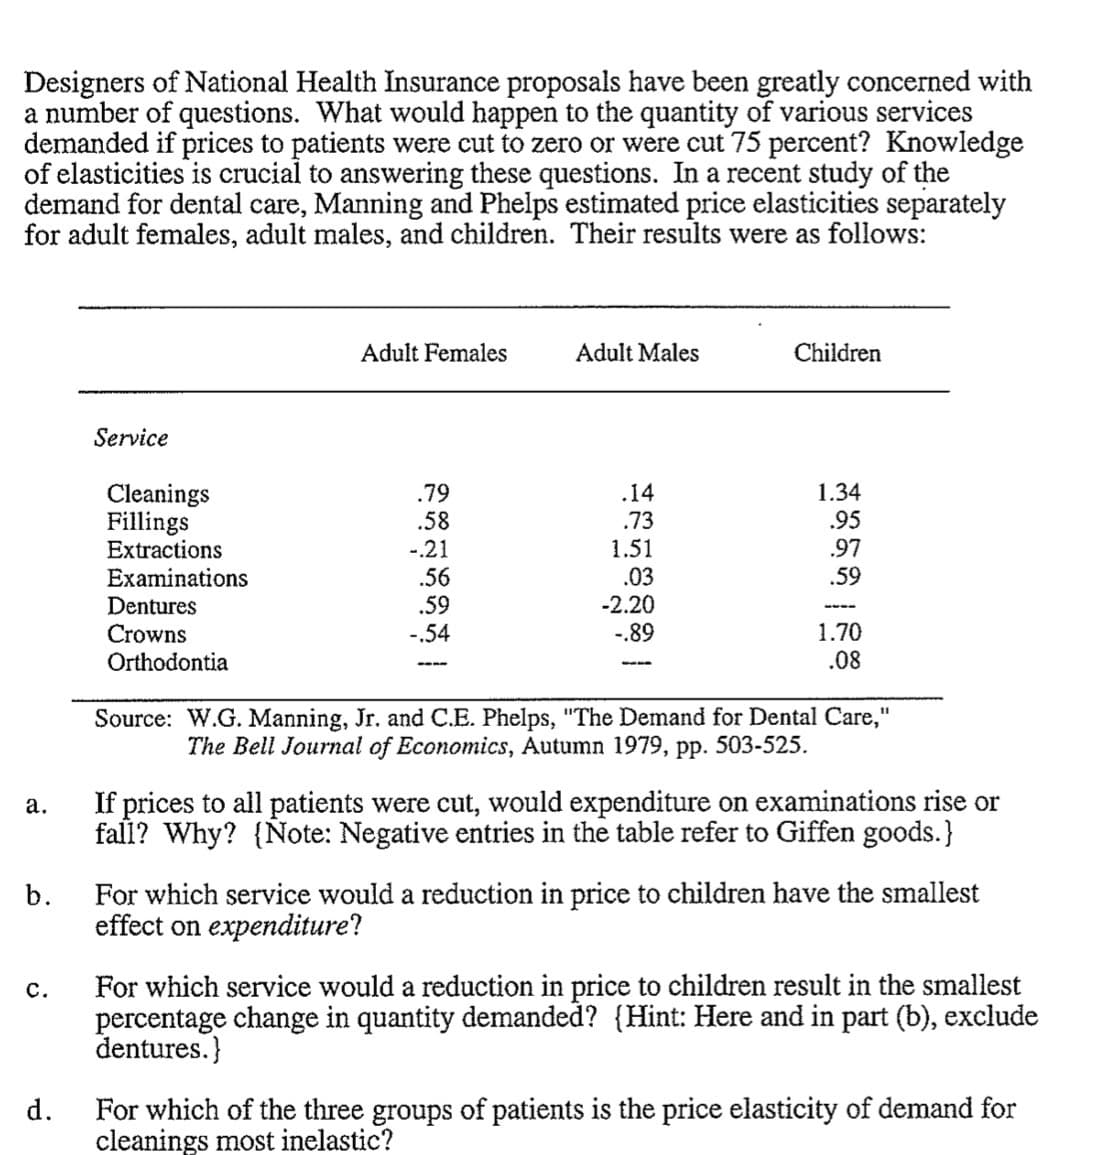 Designers of National Health Insurance proposals have been greatly concerned with
a number of questions. What would happen to the quantity of various services
demanded if prices to patients were cut to zero or were cut 75 percent? Knowledge
of elasticities is crucial to answering these questions. In a recent study of the
demand for dental care, Manning and Phelps estimated price elasticities separately
for adult females, adult males, and children. Their results were as follows:
a.
b.
C.
d.
Service
Cleanings
Fillings
Extractions
Examinations
Dentures
Crowns
Orthodontia
Adult Females
.79
.58
-.21
.56
.59
-.54
Adult Males
.14
.73
1.51
.03
-2.20
-.89
Children
1.34
.95
.97
.59
1.70
.08
Source: W.G. Manning, Jr. and C.E. Phelps, "The Demand for Dental Care,"
The Bell Journal of Economics, Autumn 1979, pp. 503-525.
If prices to all patients were cut, would expenditure on examinations rise or
fall? Why? {Note: Negative entries in the table refer to Giffen goods.}
For which service would a reduction in price to children have the smallest
effect on expenditure?
For which service would a reduction in price to children result in the smallest
percentage change in quantity demanded? {Hint: Here and in part (b), exclude
dentures.}
For which of the three groups of patients is the price elasticity of demand for
cleanings most inelastic?